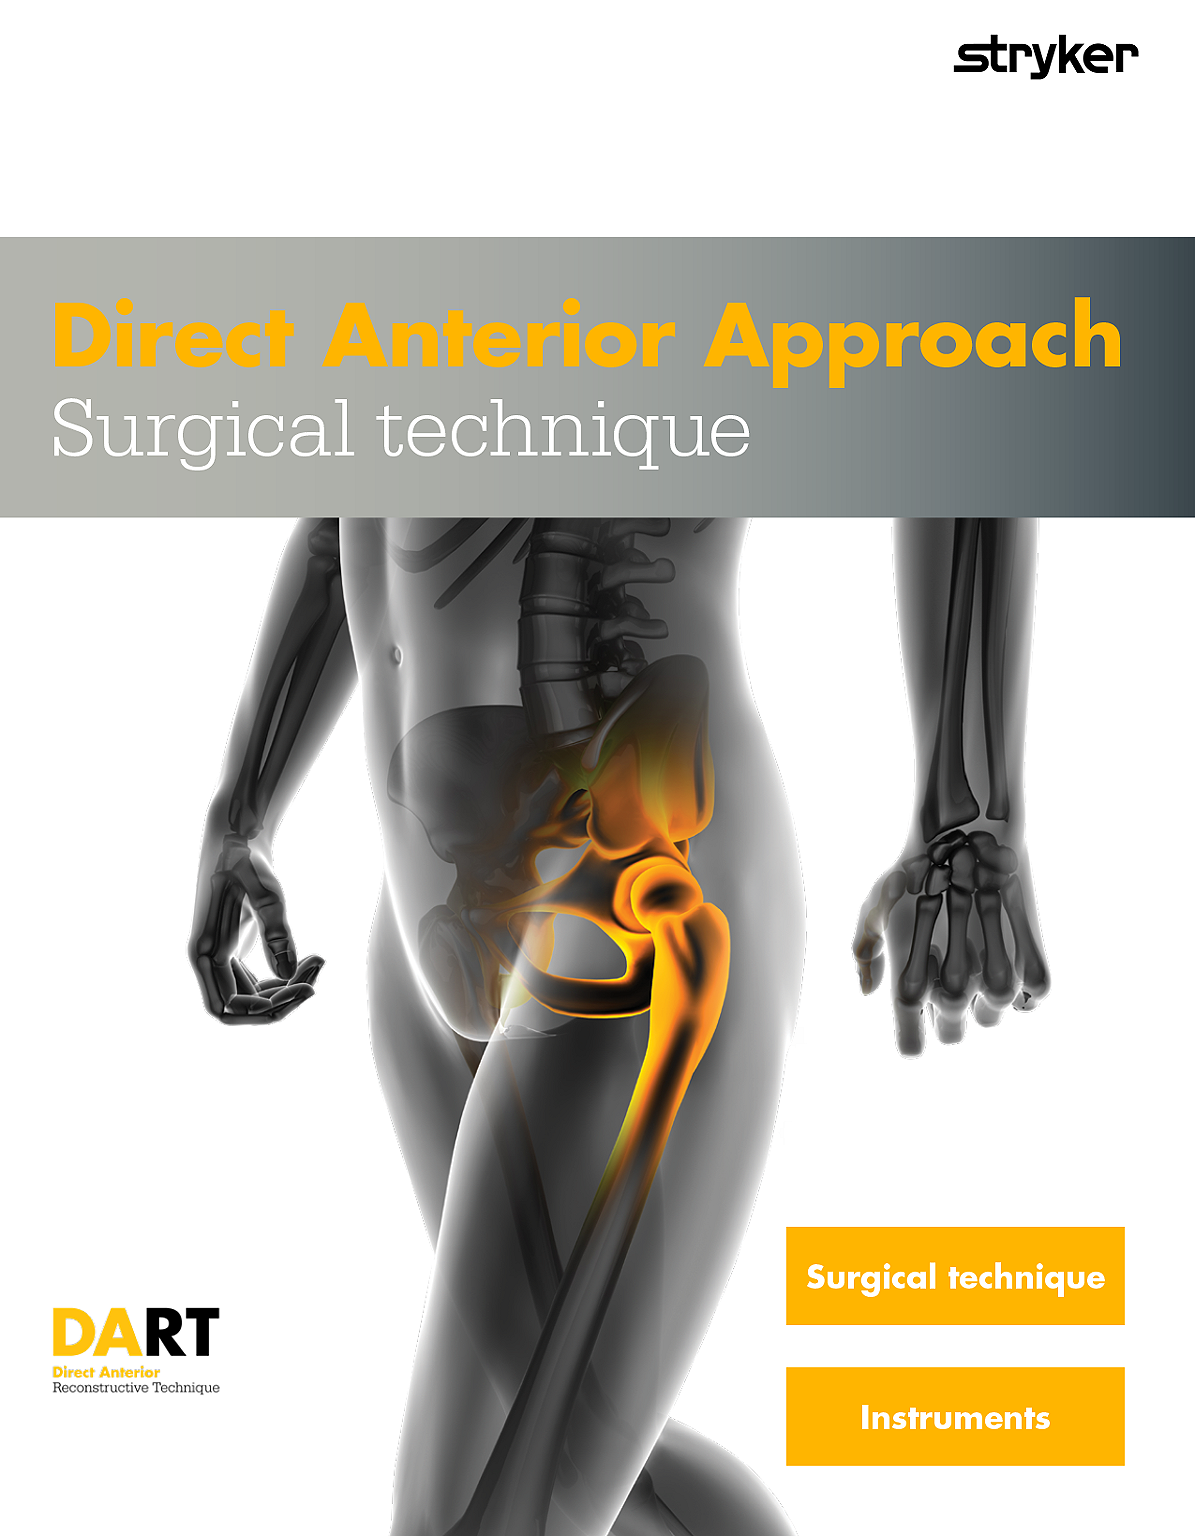 Direct Anterior Approach Surgical Technique